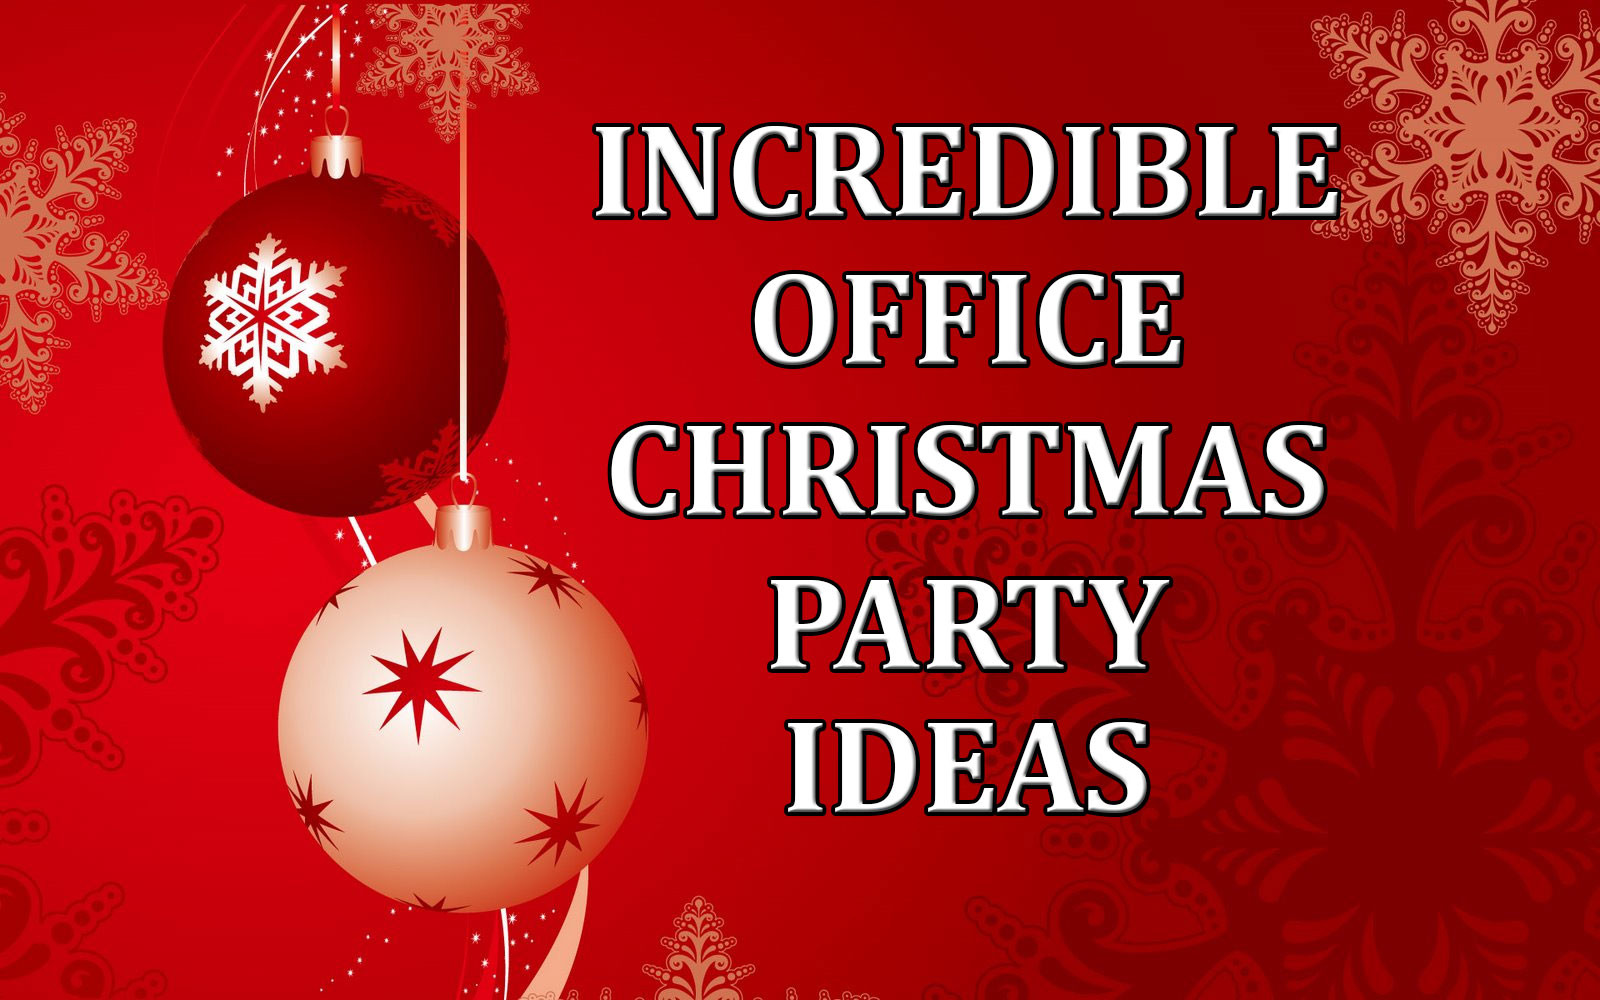 Christmas Office Party Ideas
 Incredible fice Christmas Party Ideas edy Ventriloquist